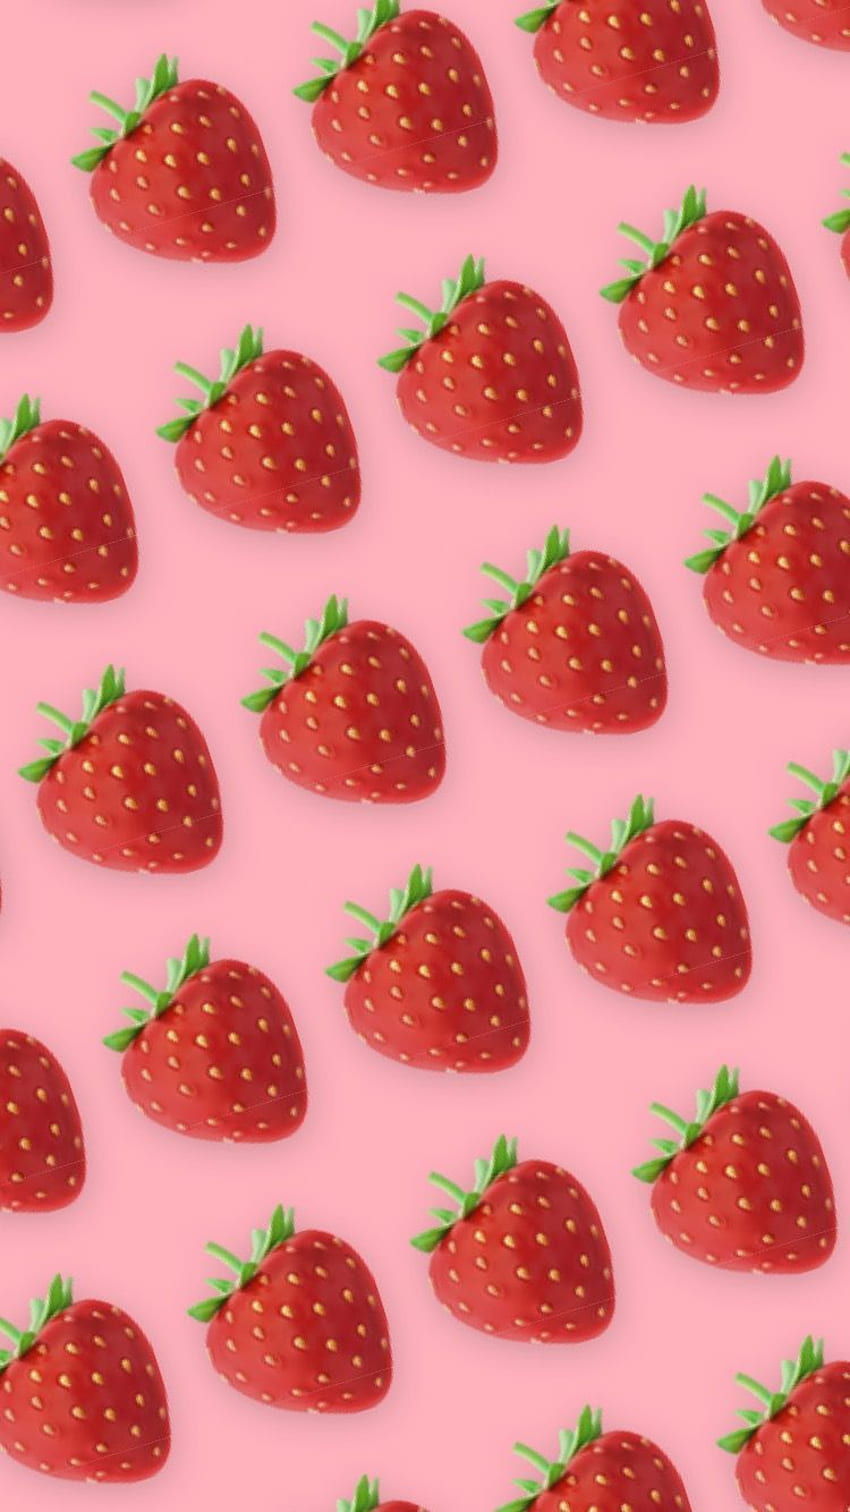 Strawberry pink aesthetic in 2020. Pink aesthetic, Aesthetic , Pink HD ...